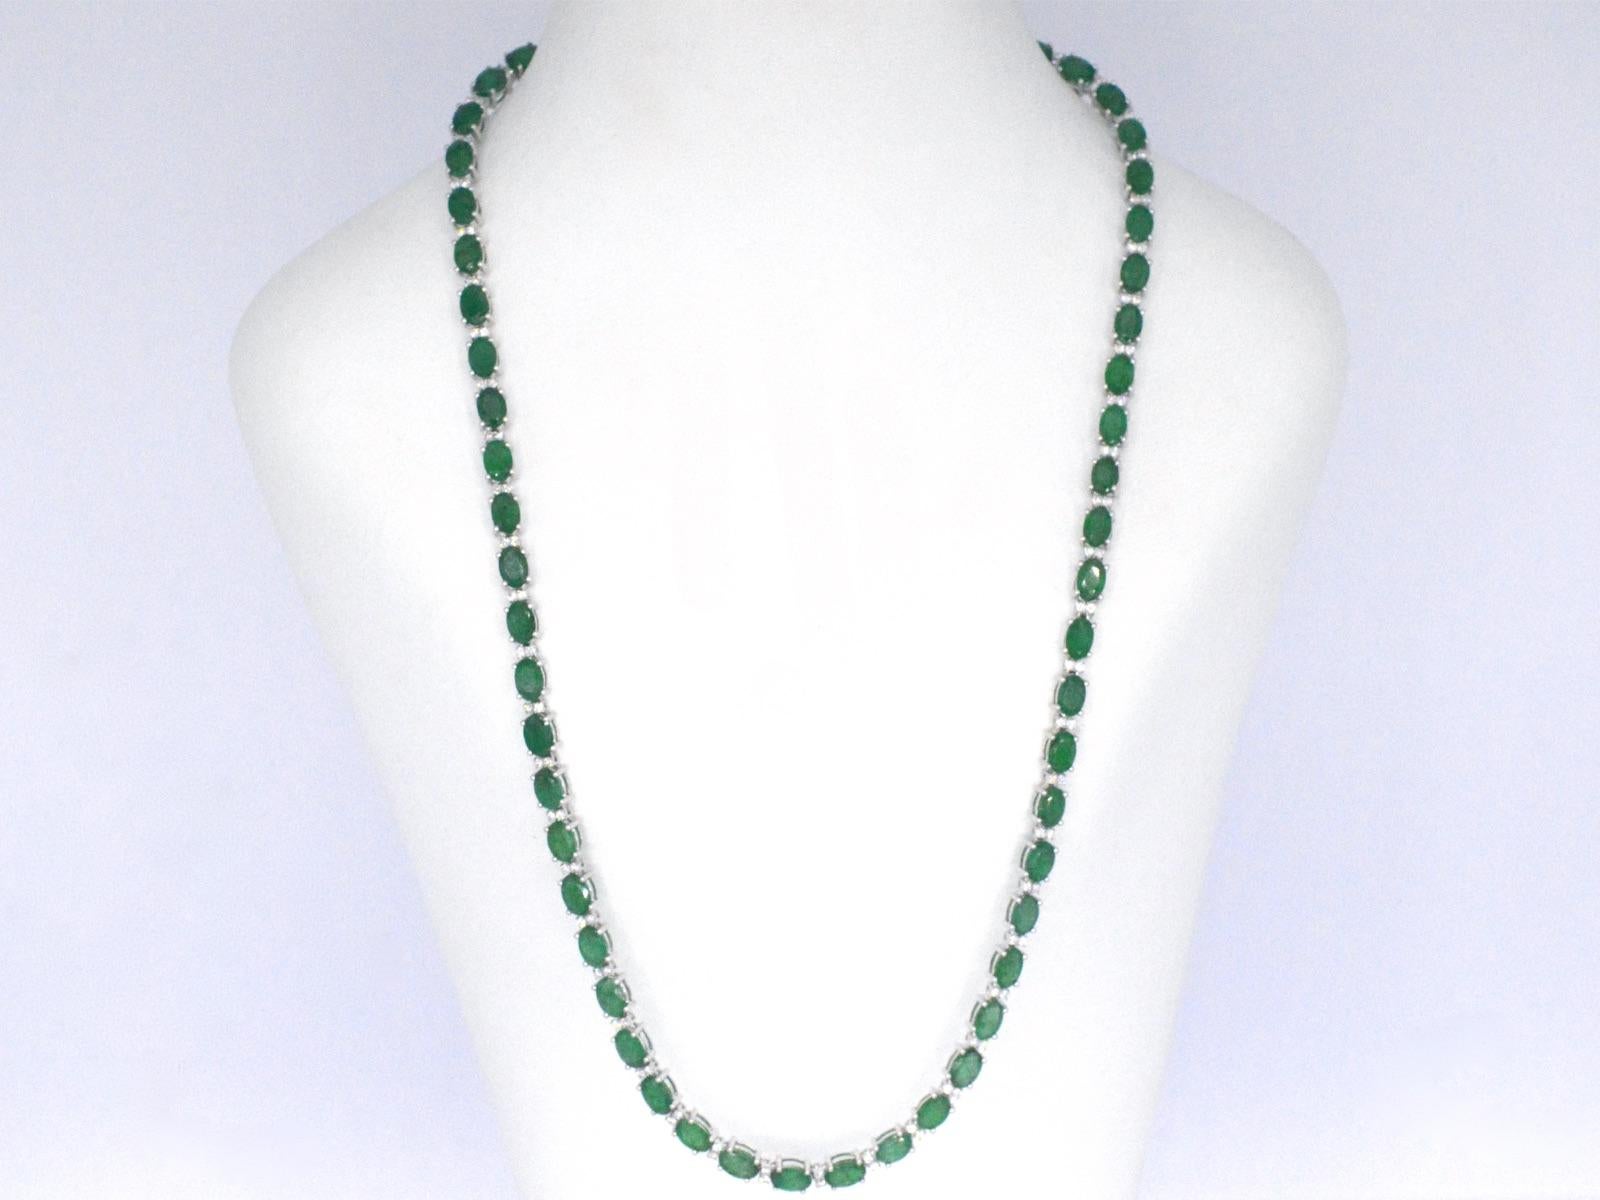 This white gold necklace is an exquisite piece of jewelry that features 25.00 carats of oval-cut emeralds and sparkling diamonds. The emeralds are arranged in a breathtaking pattern that creates a stunning display of color and brilliance, while the